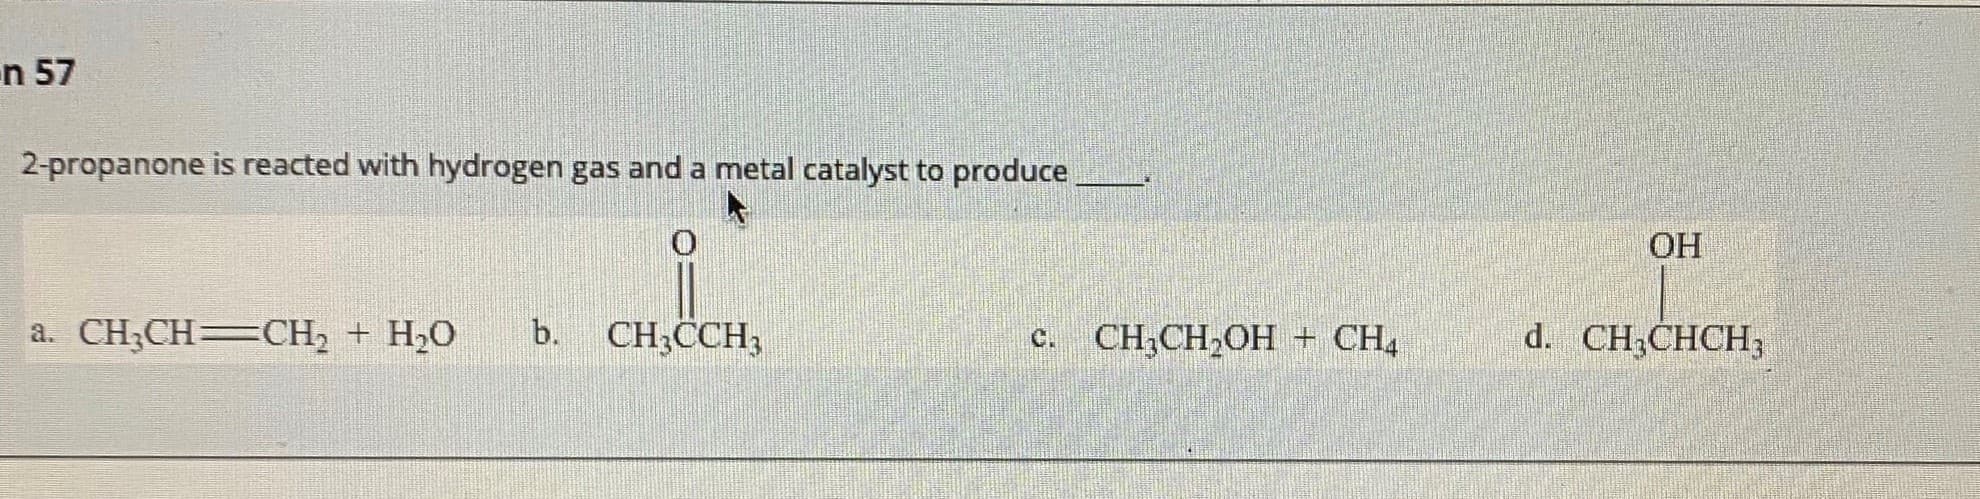 2-propanone is reacted with hydrogen gas and a metal catalyst to produce
ОН
a. CH;CH=CH, + H,O
b.
CH;CCH,
с. CН CH,ОH - СH
d. CH;CHCH;
